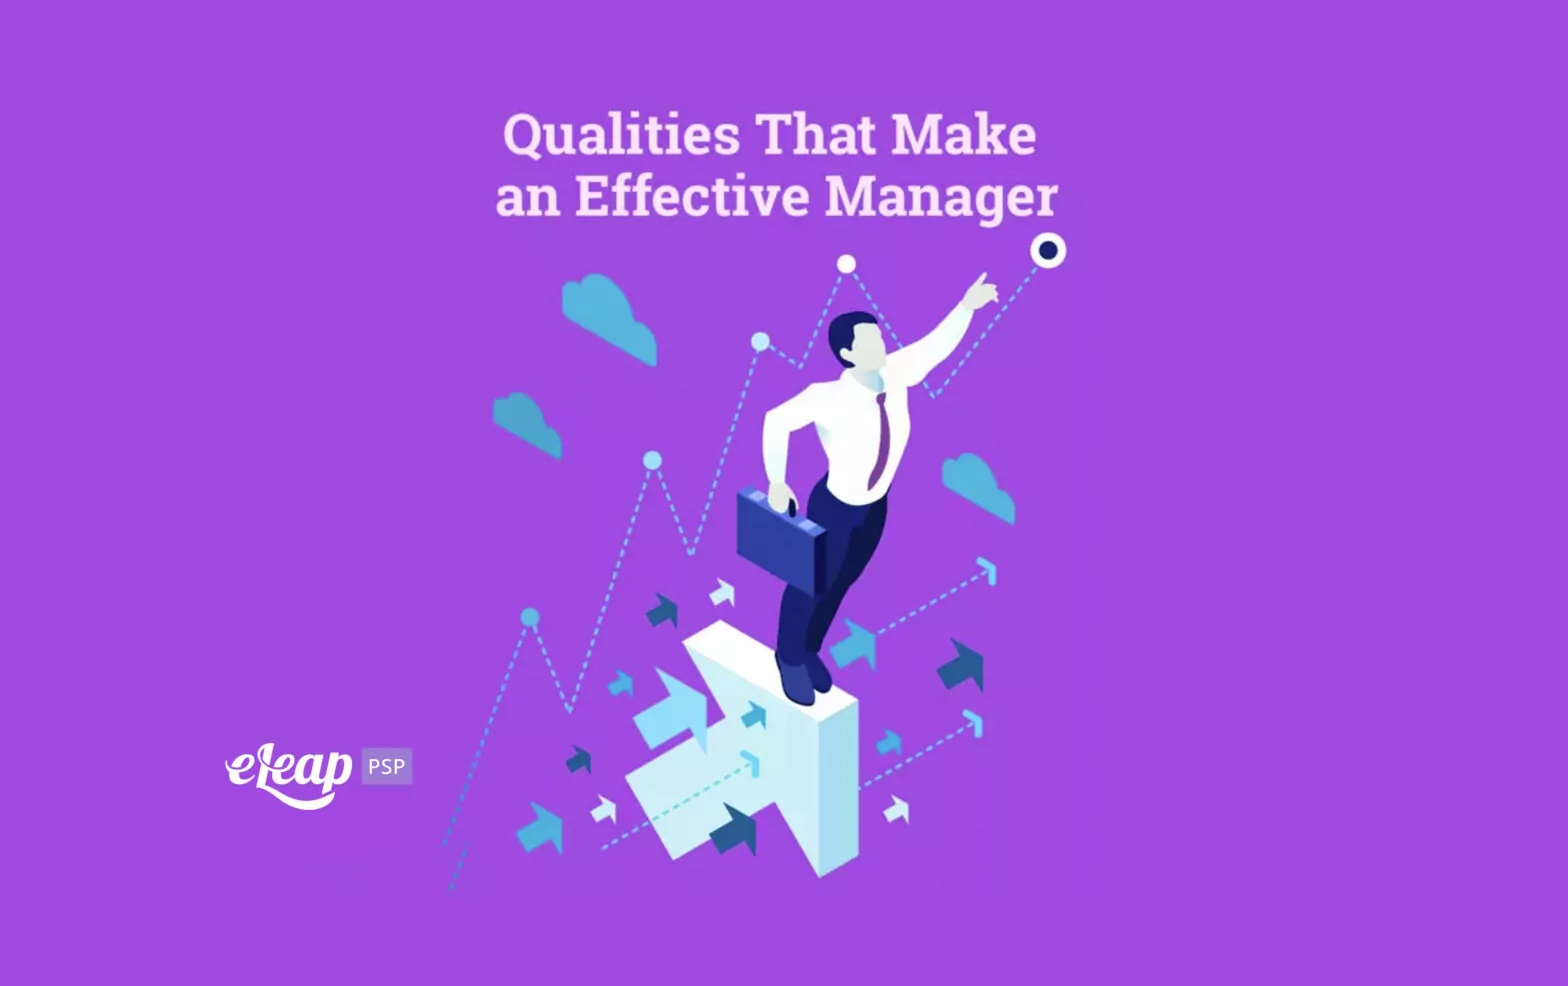 Qualities That Make an Effective Manager